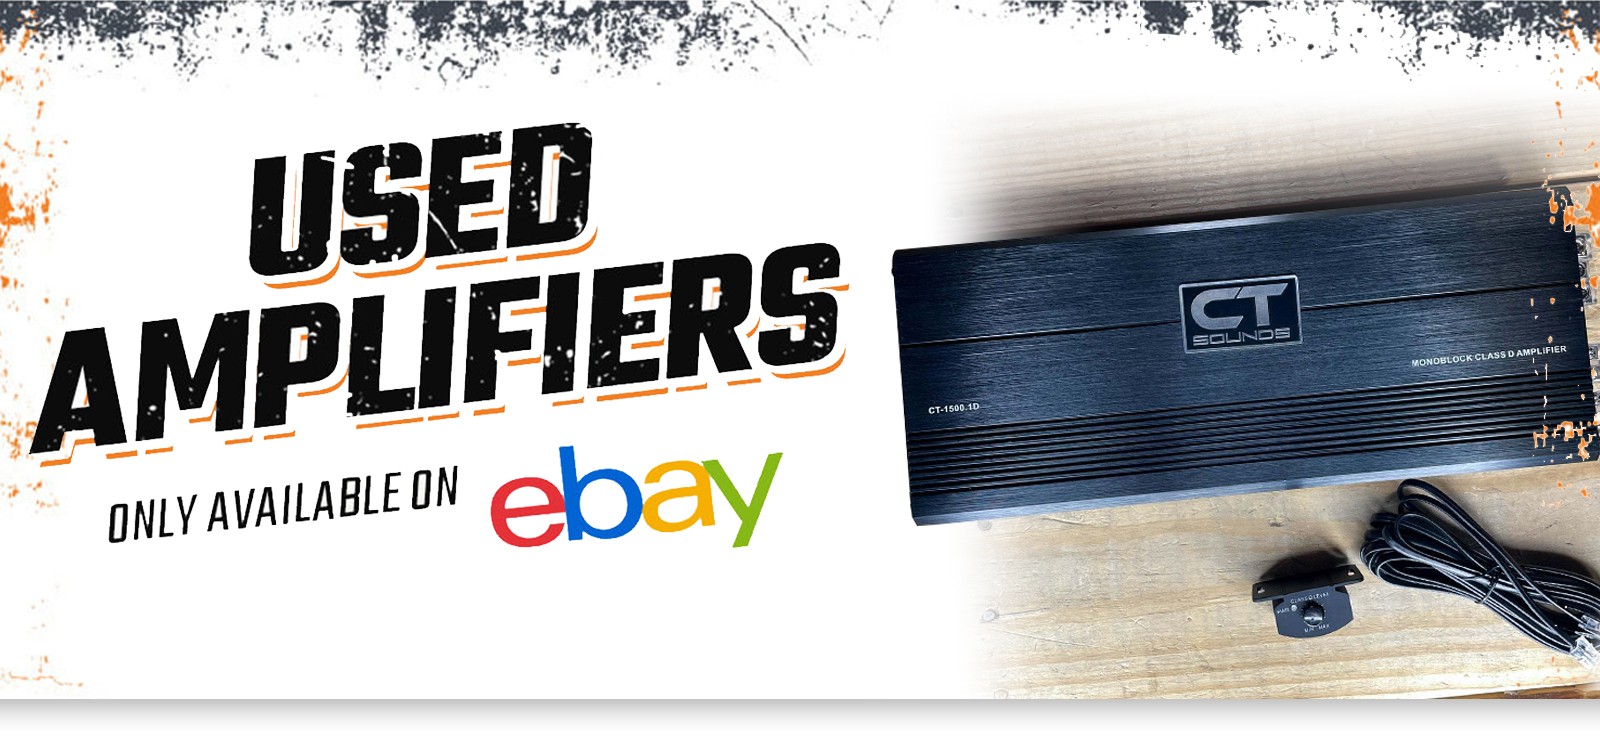 Used Amplifiers - Only Available On Ebay